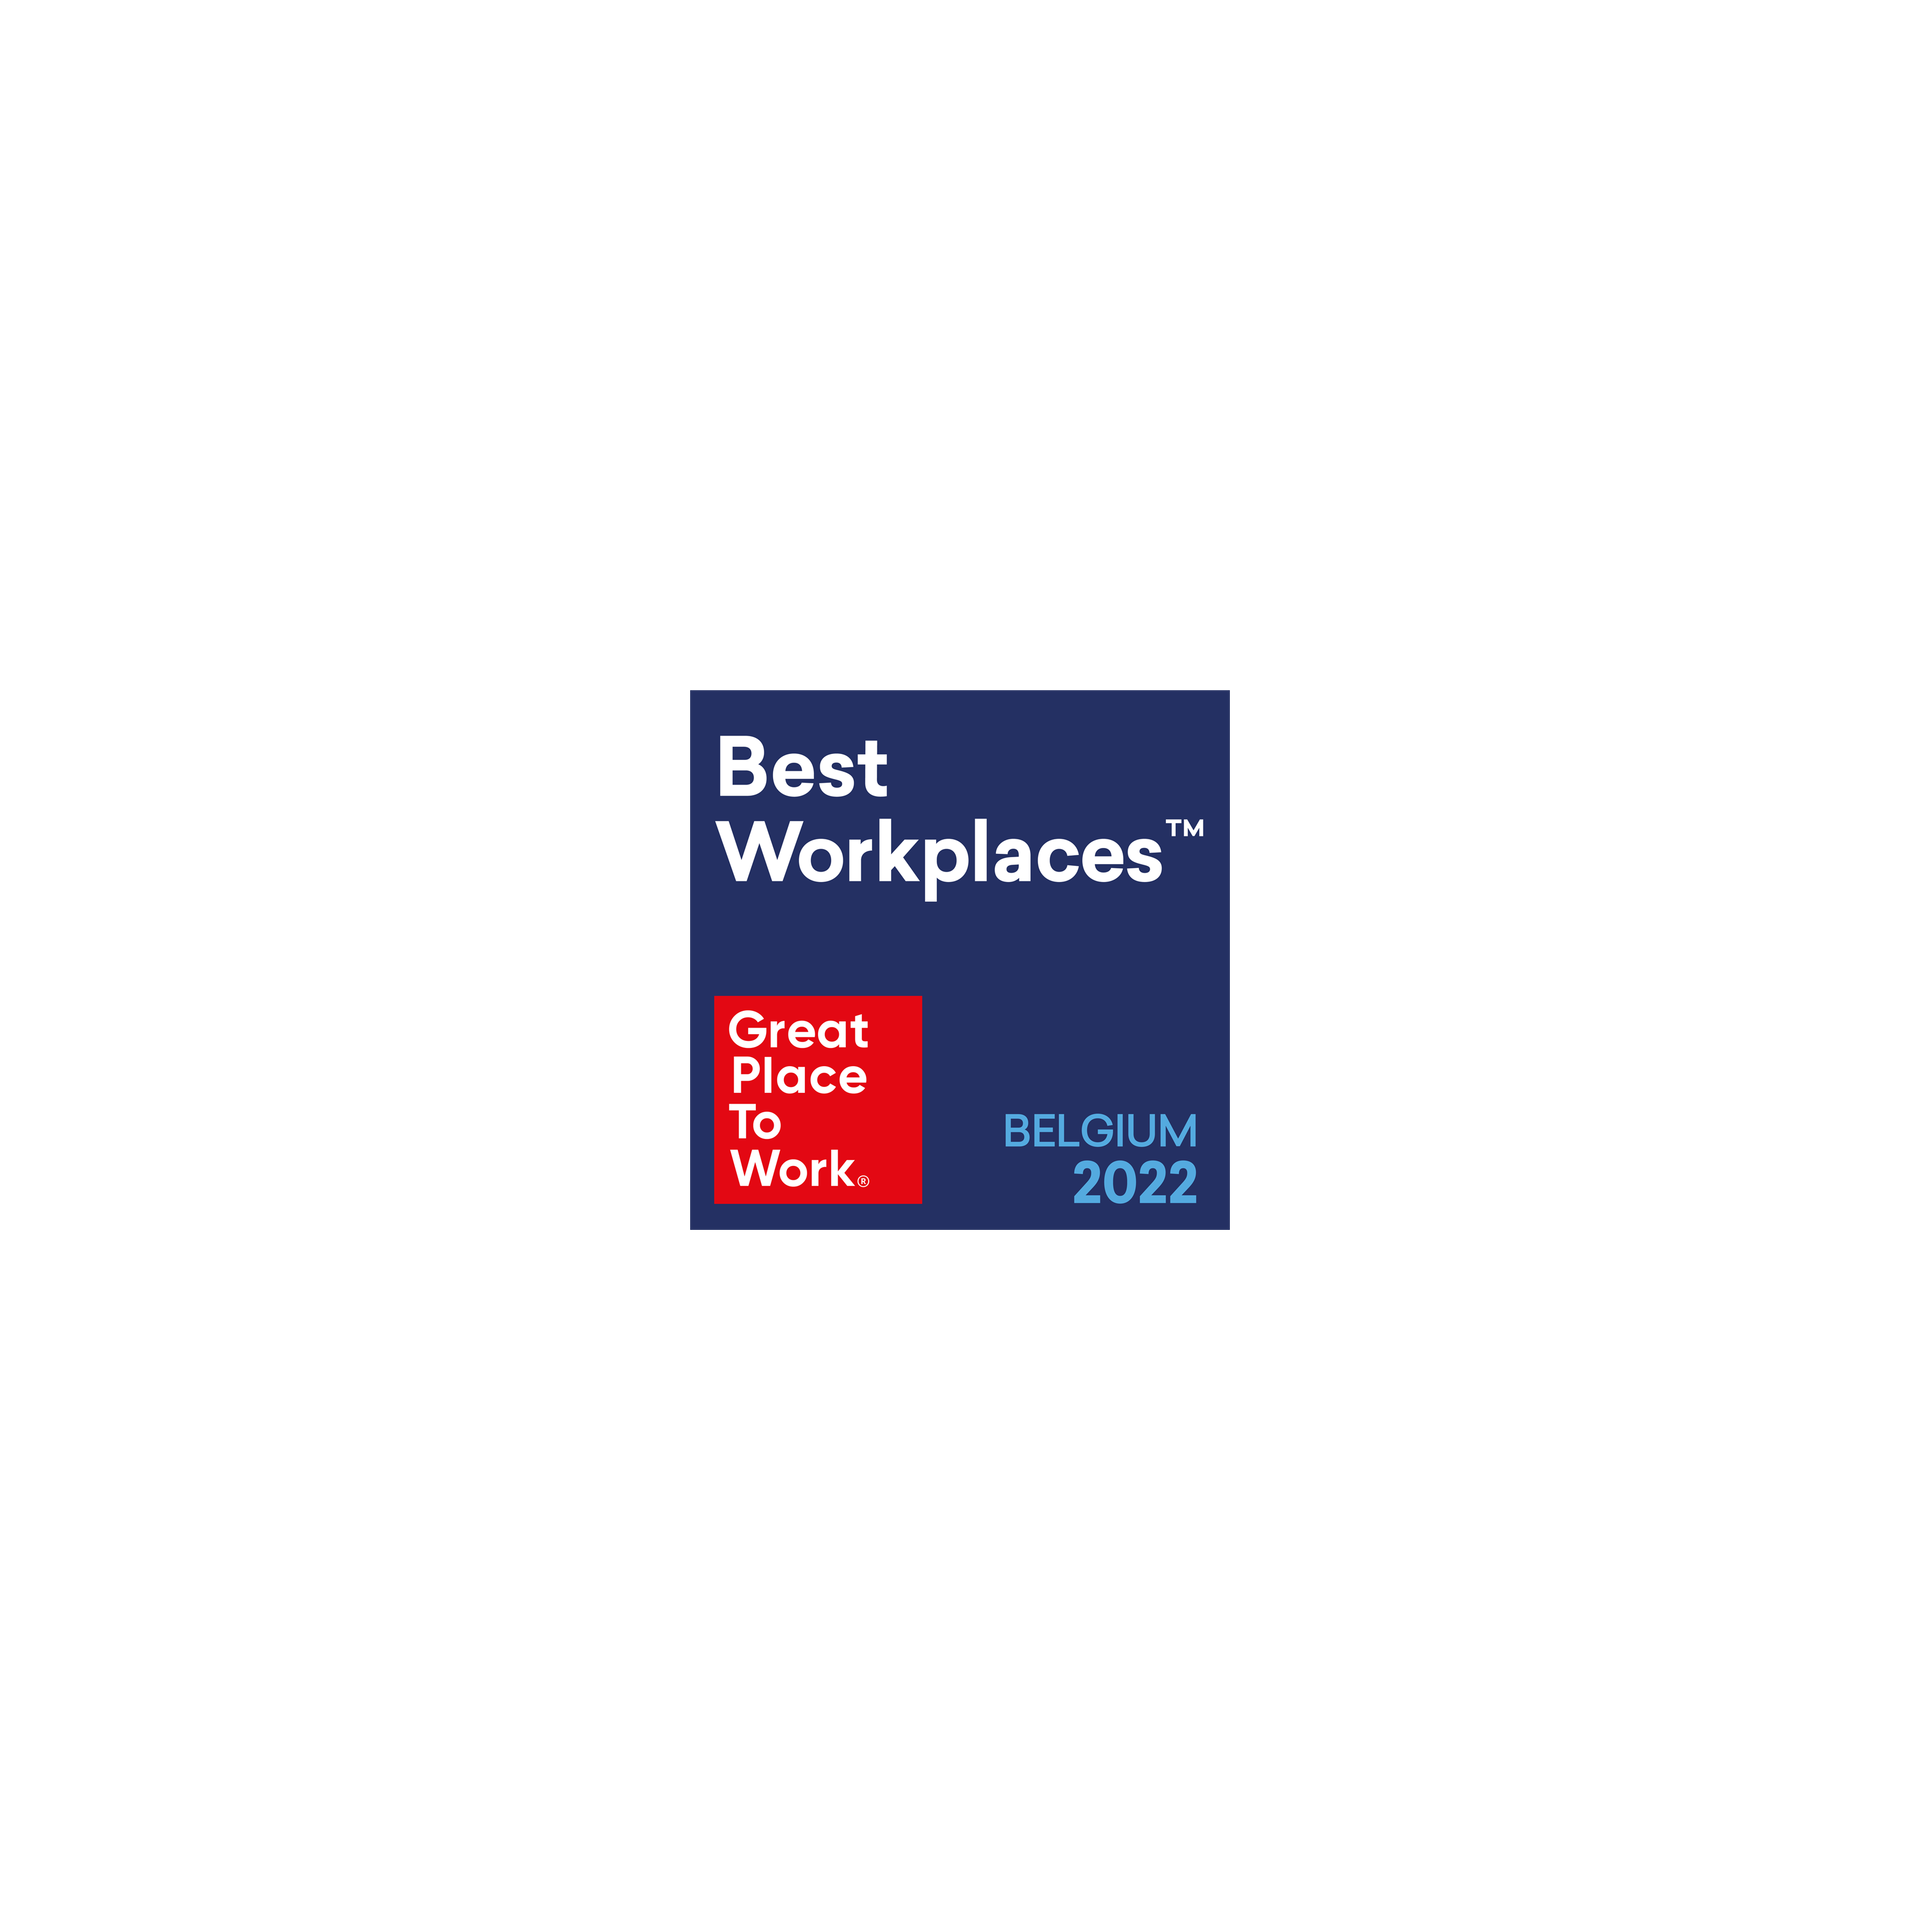 Best Workplaces 2022 small